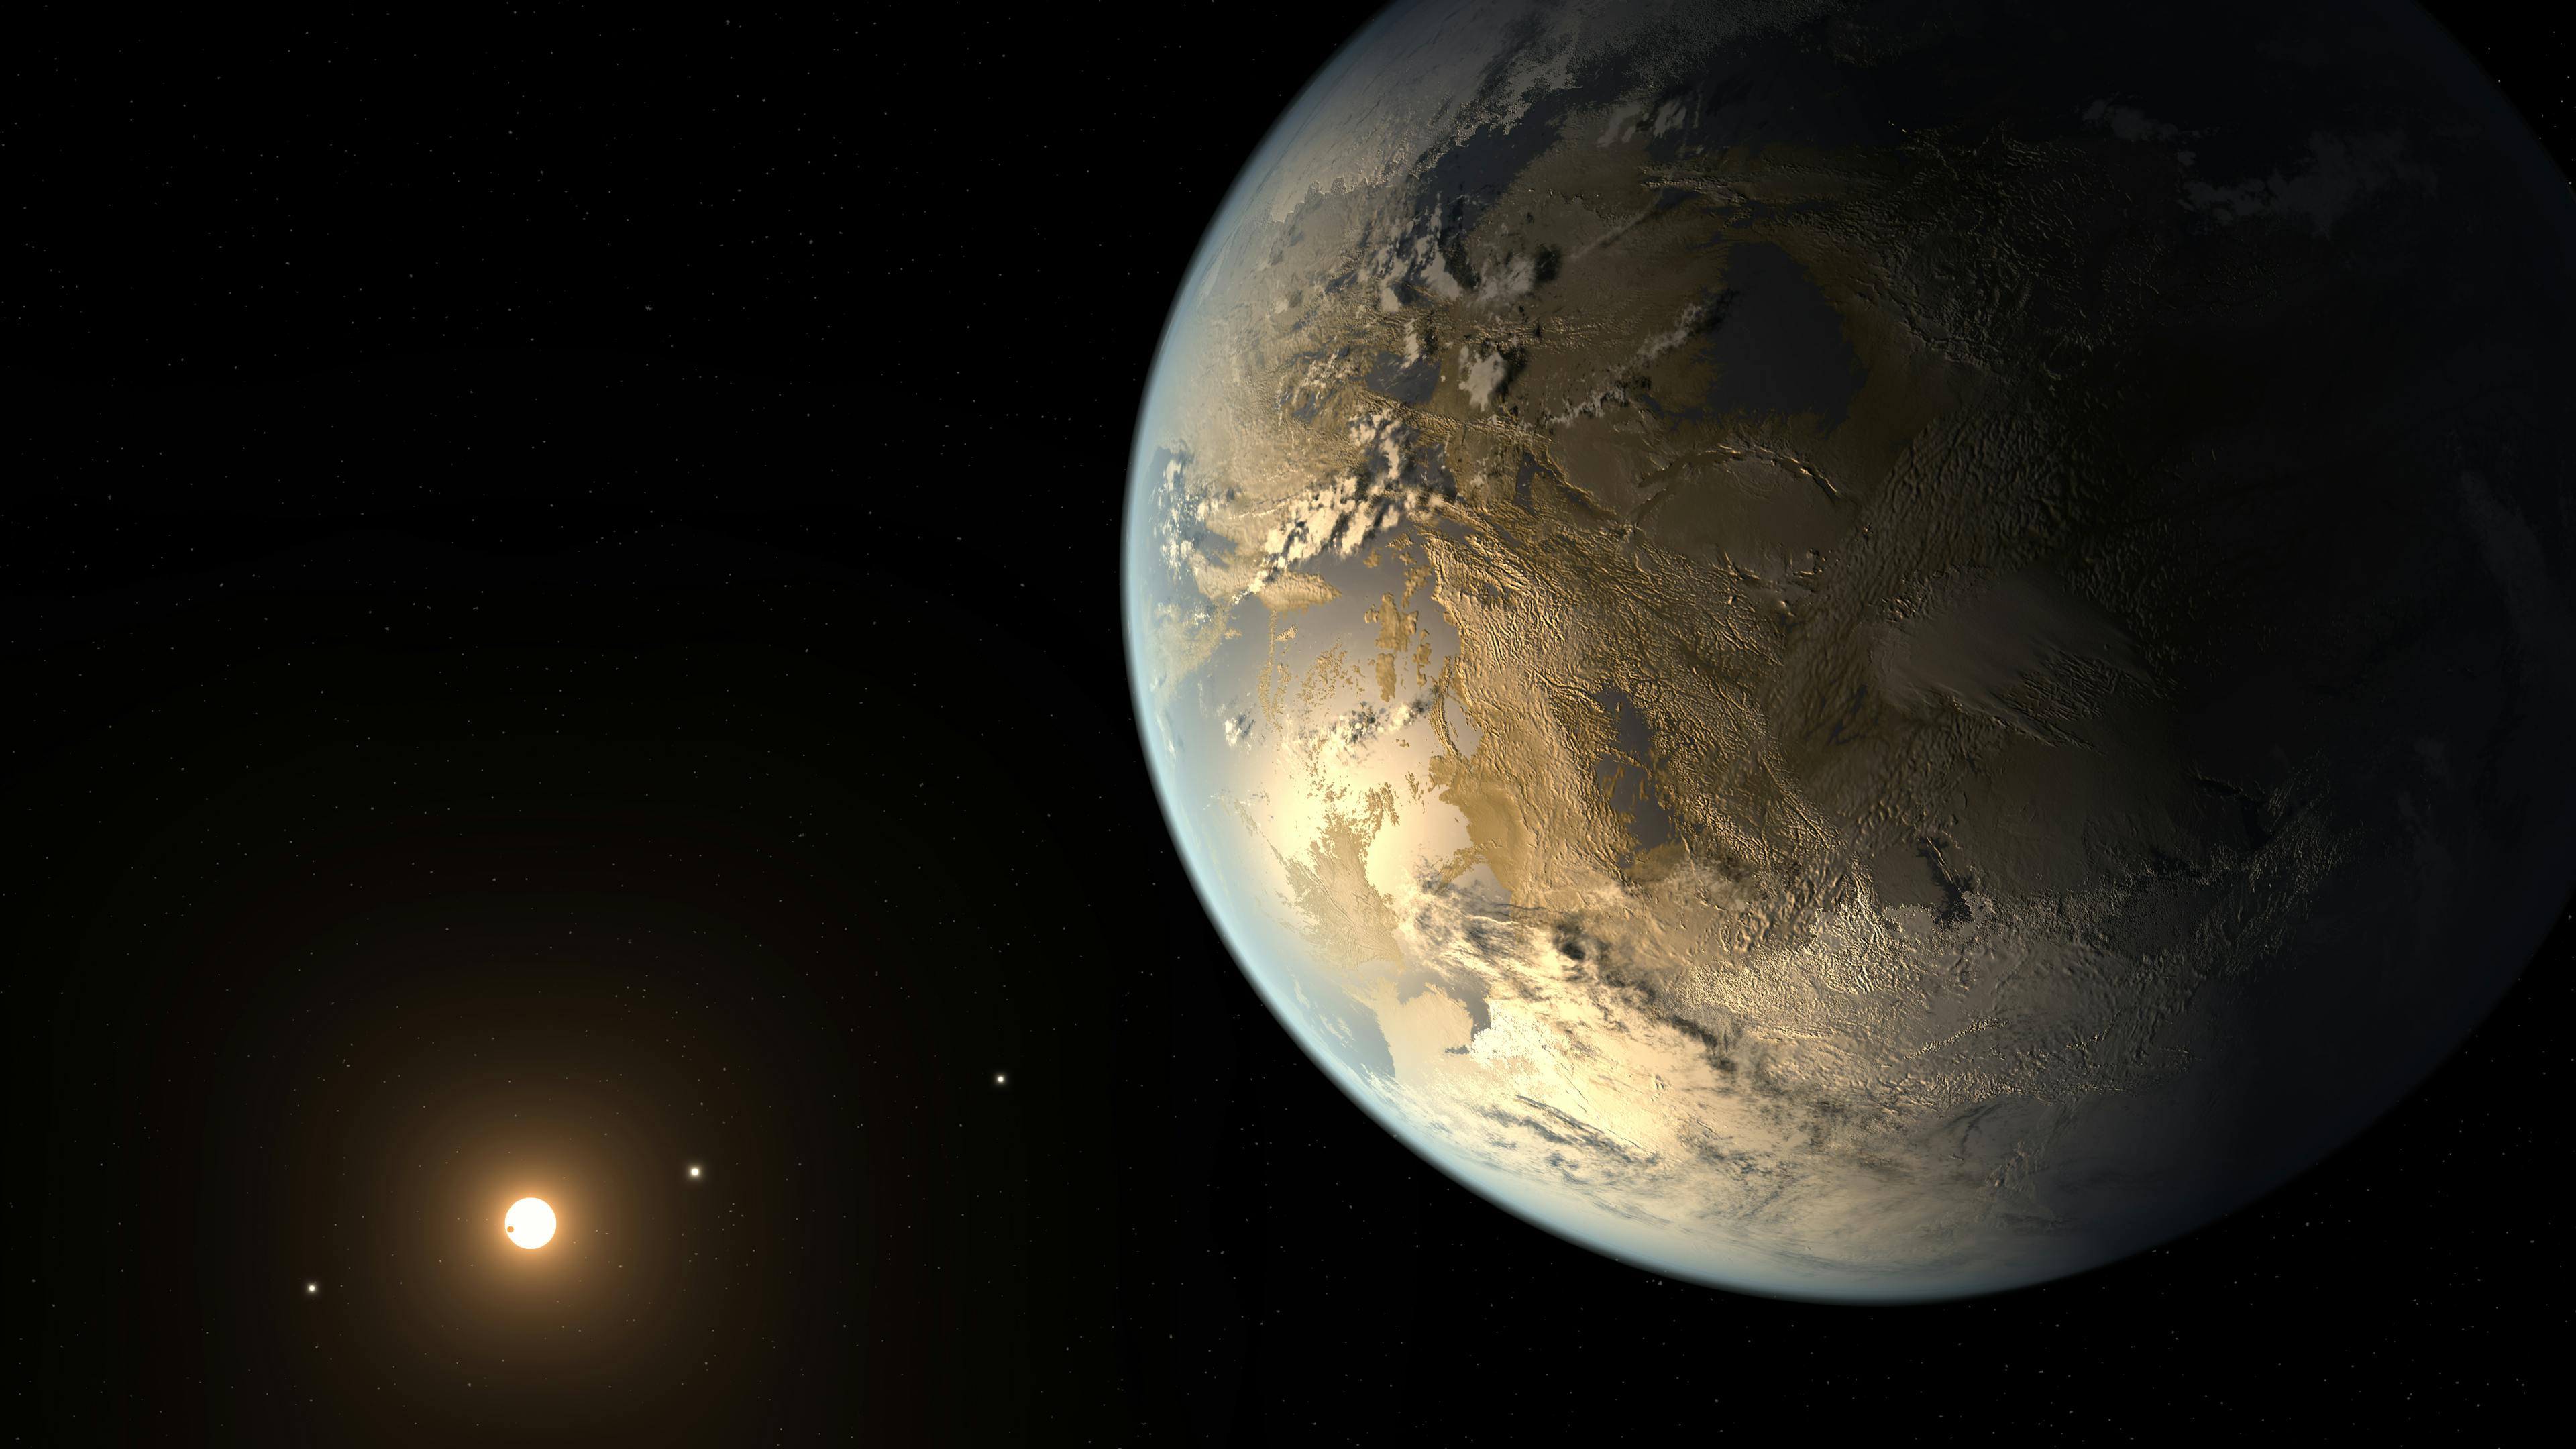 Kepler has discovered the most Earth-like planet yet